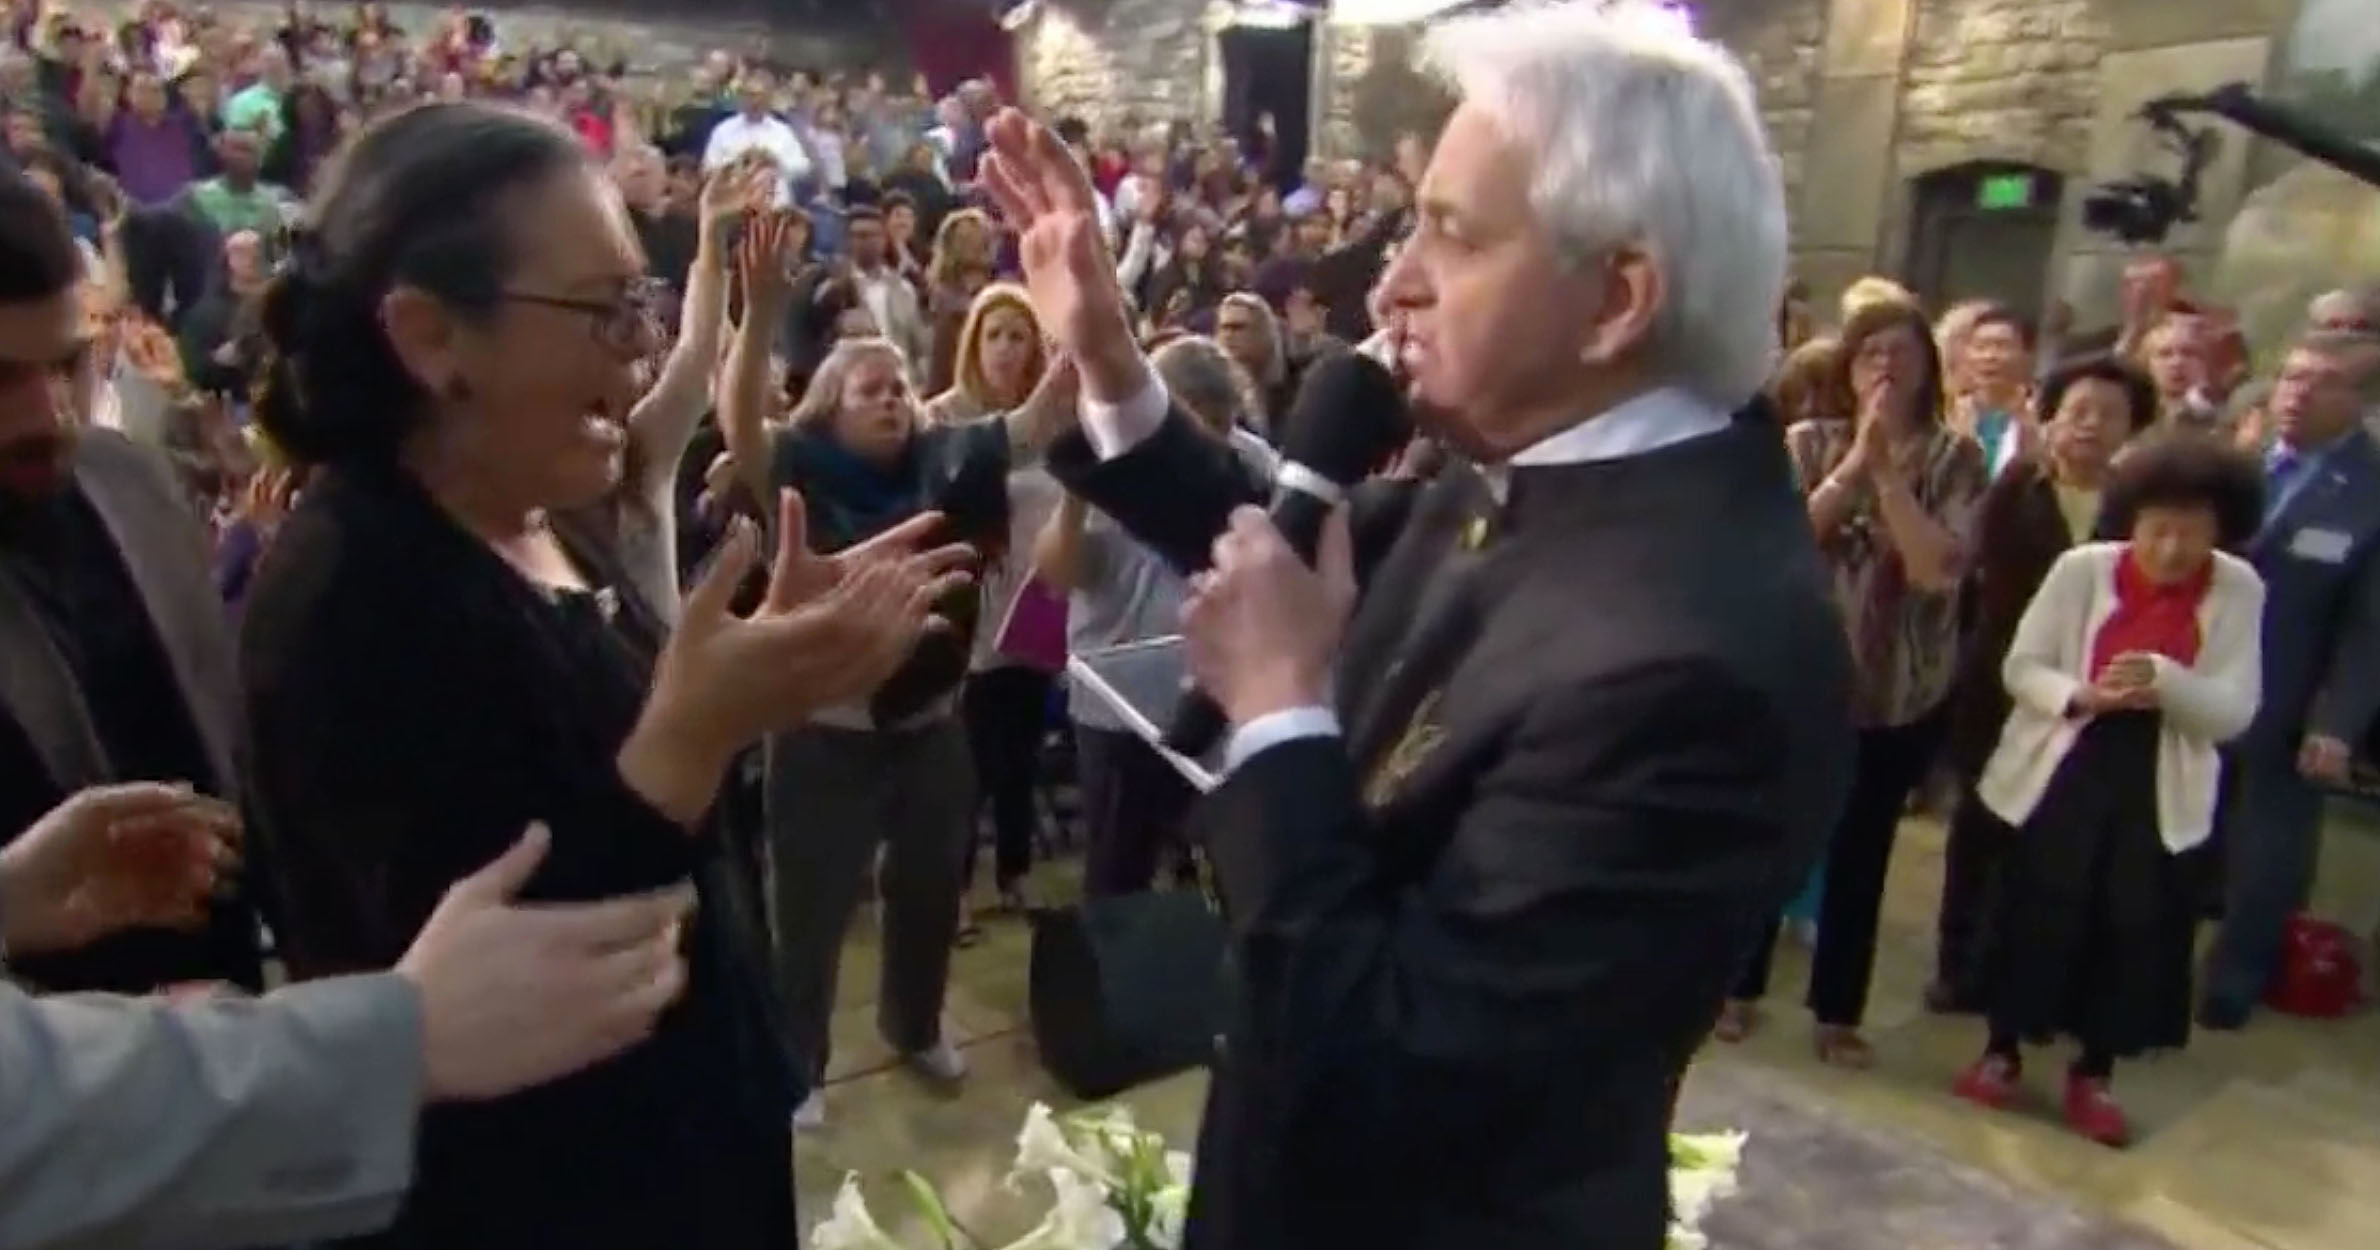 Televangelist Benny Hinn raided by the feds for fraud &#038; tax evasion